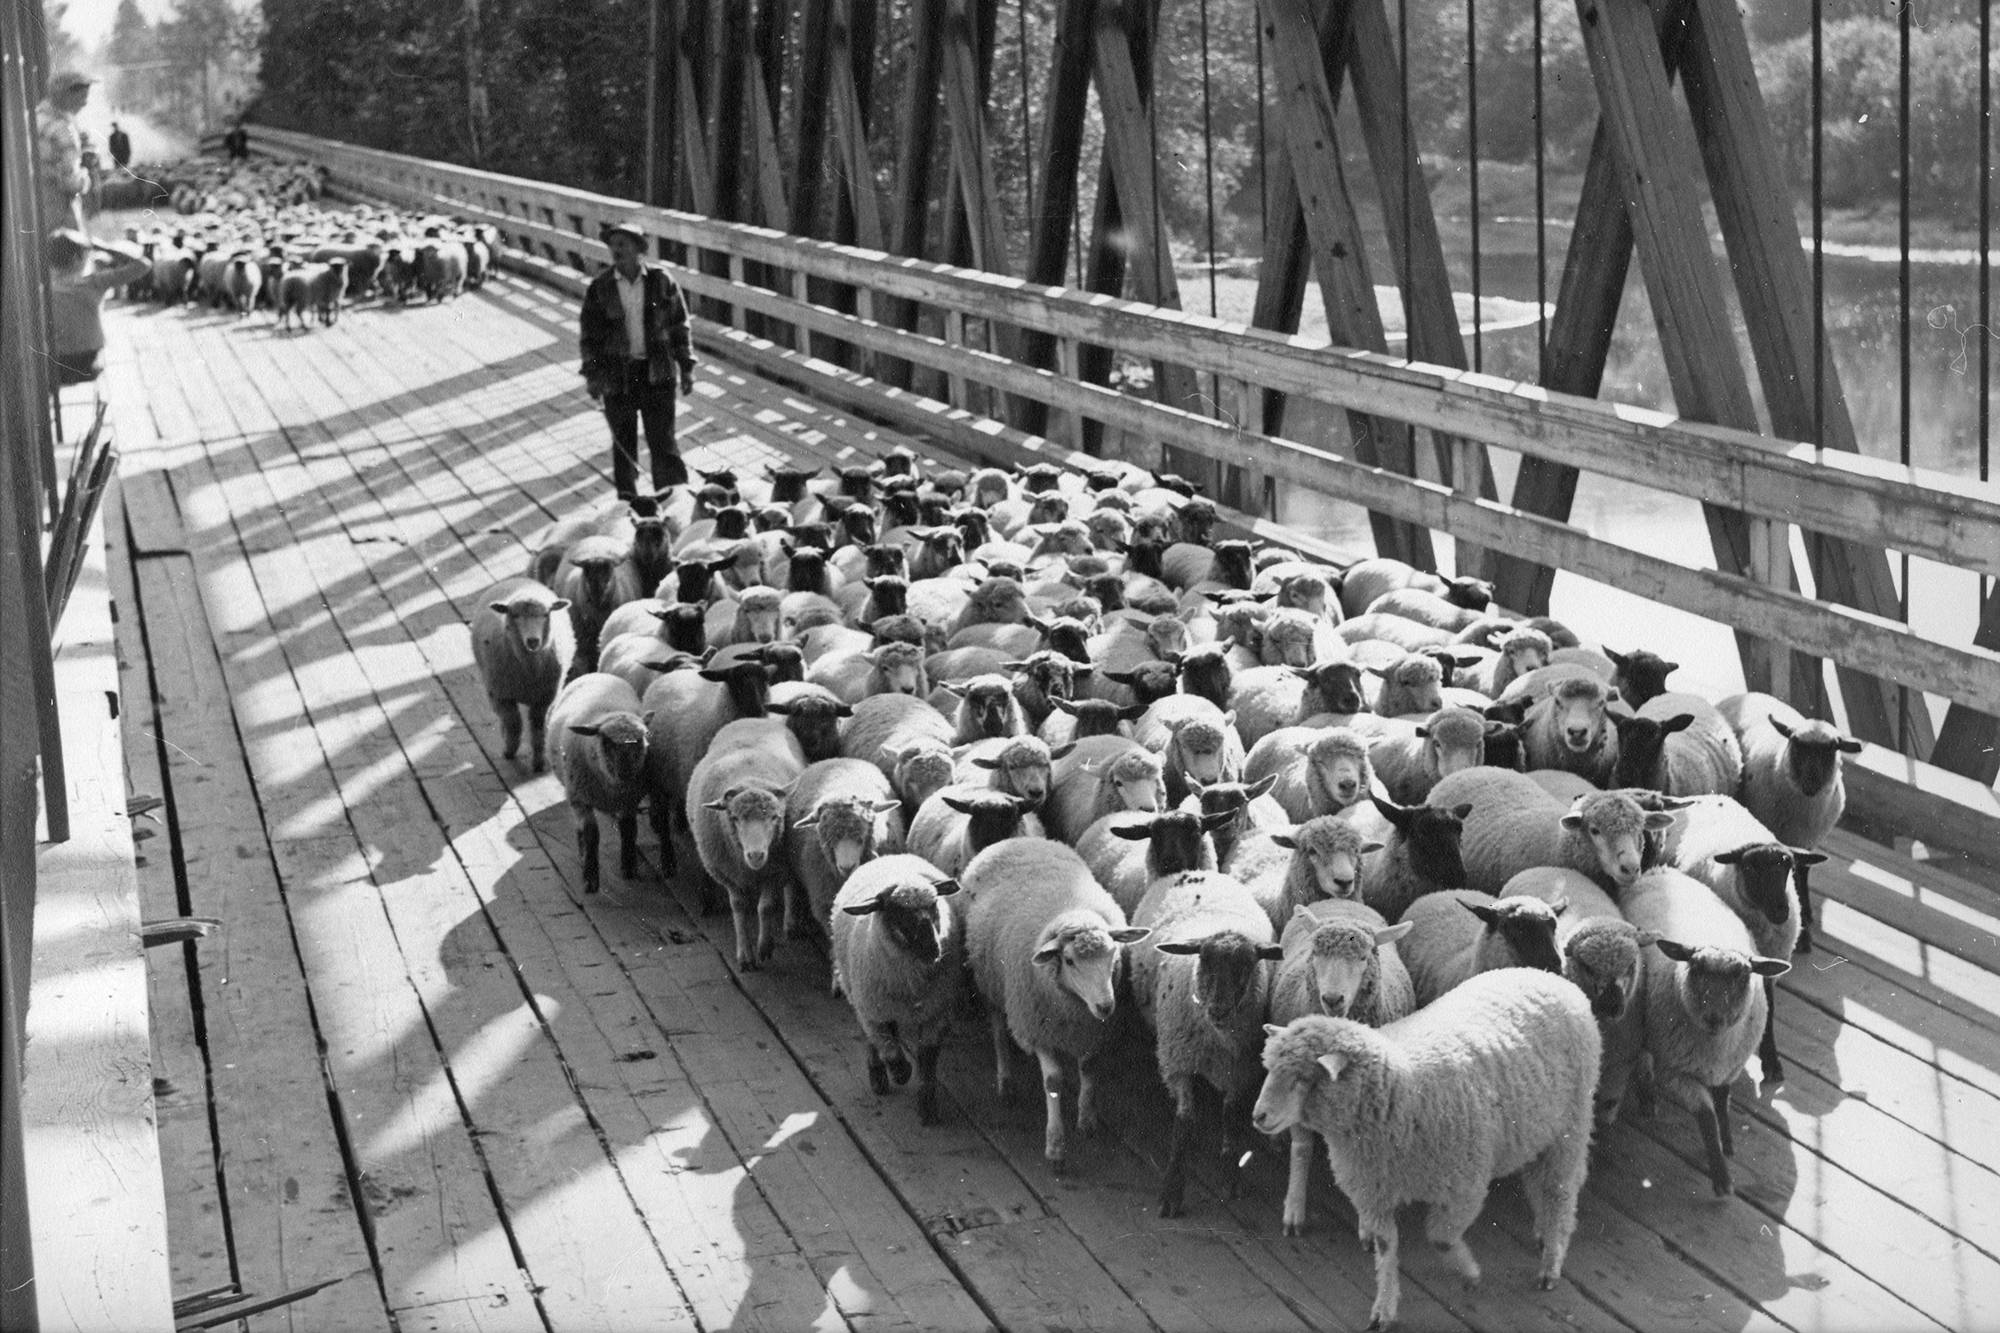 18090087_web1_copy_copy_190809-SAA-our-history-in-pictures-sheep